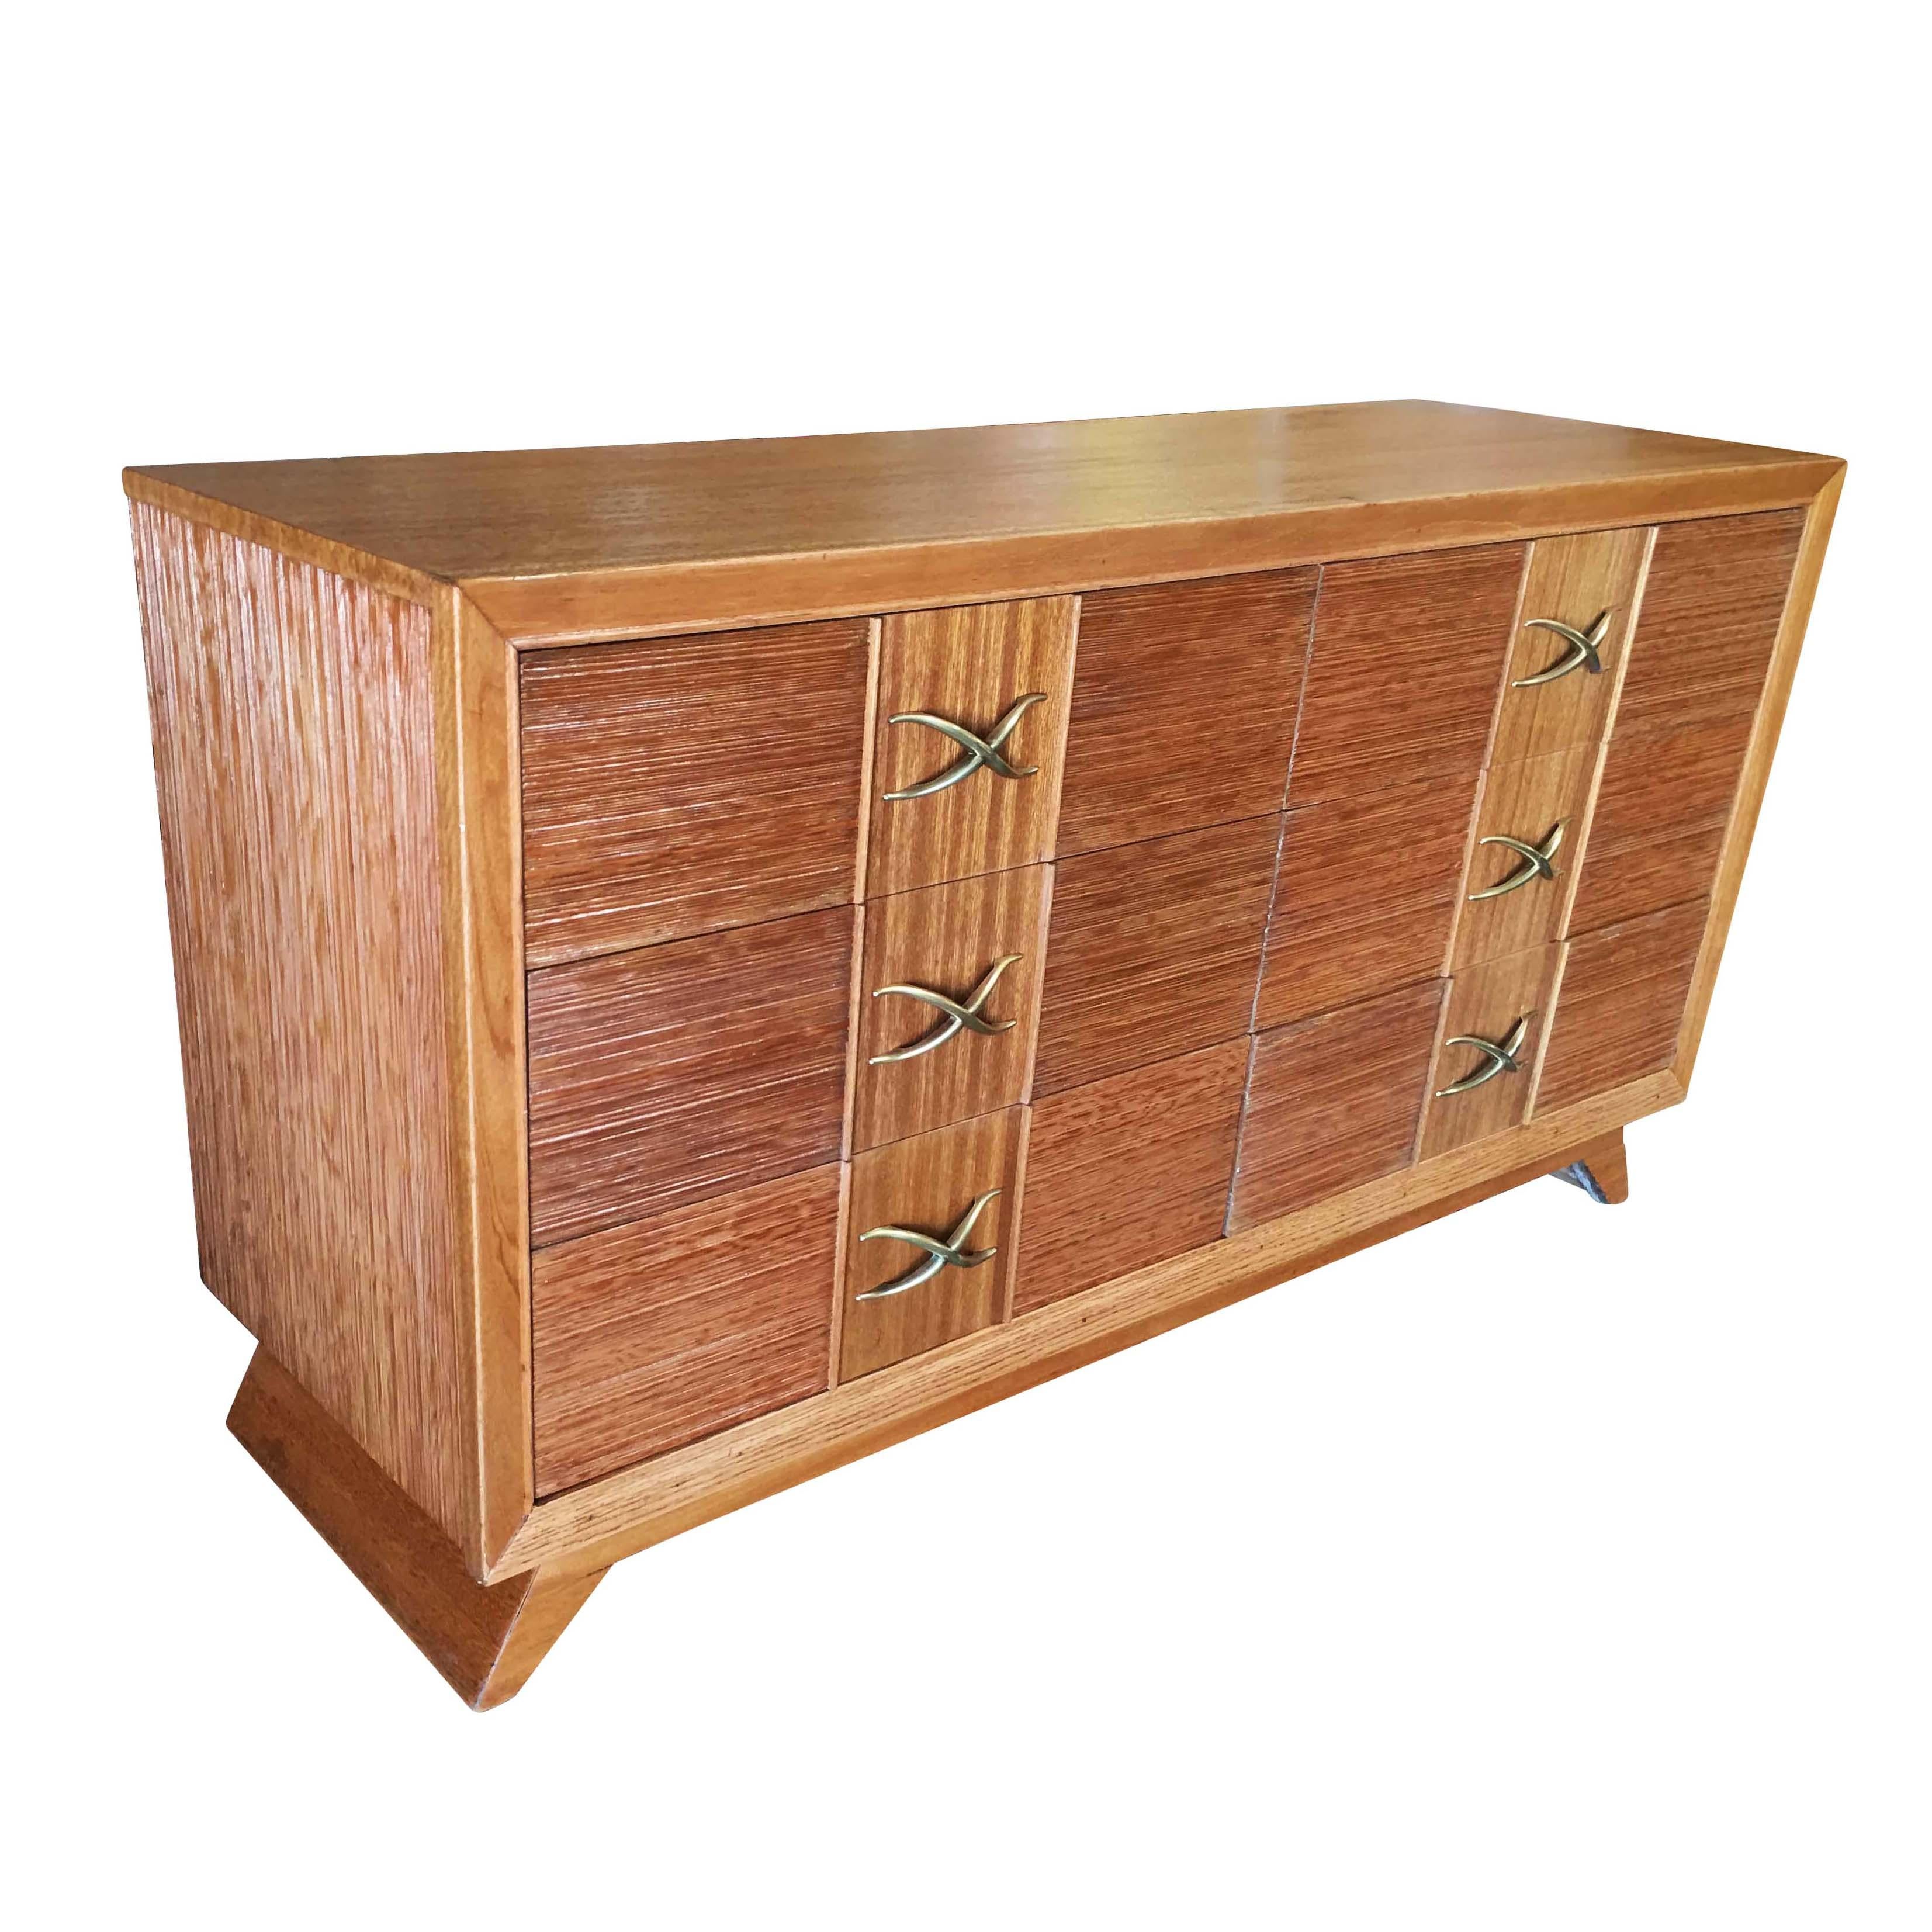 Mid Century dresser by Paul Frankl for Brown Saltman company features his trademark combed wood sides with curled brass pulls.